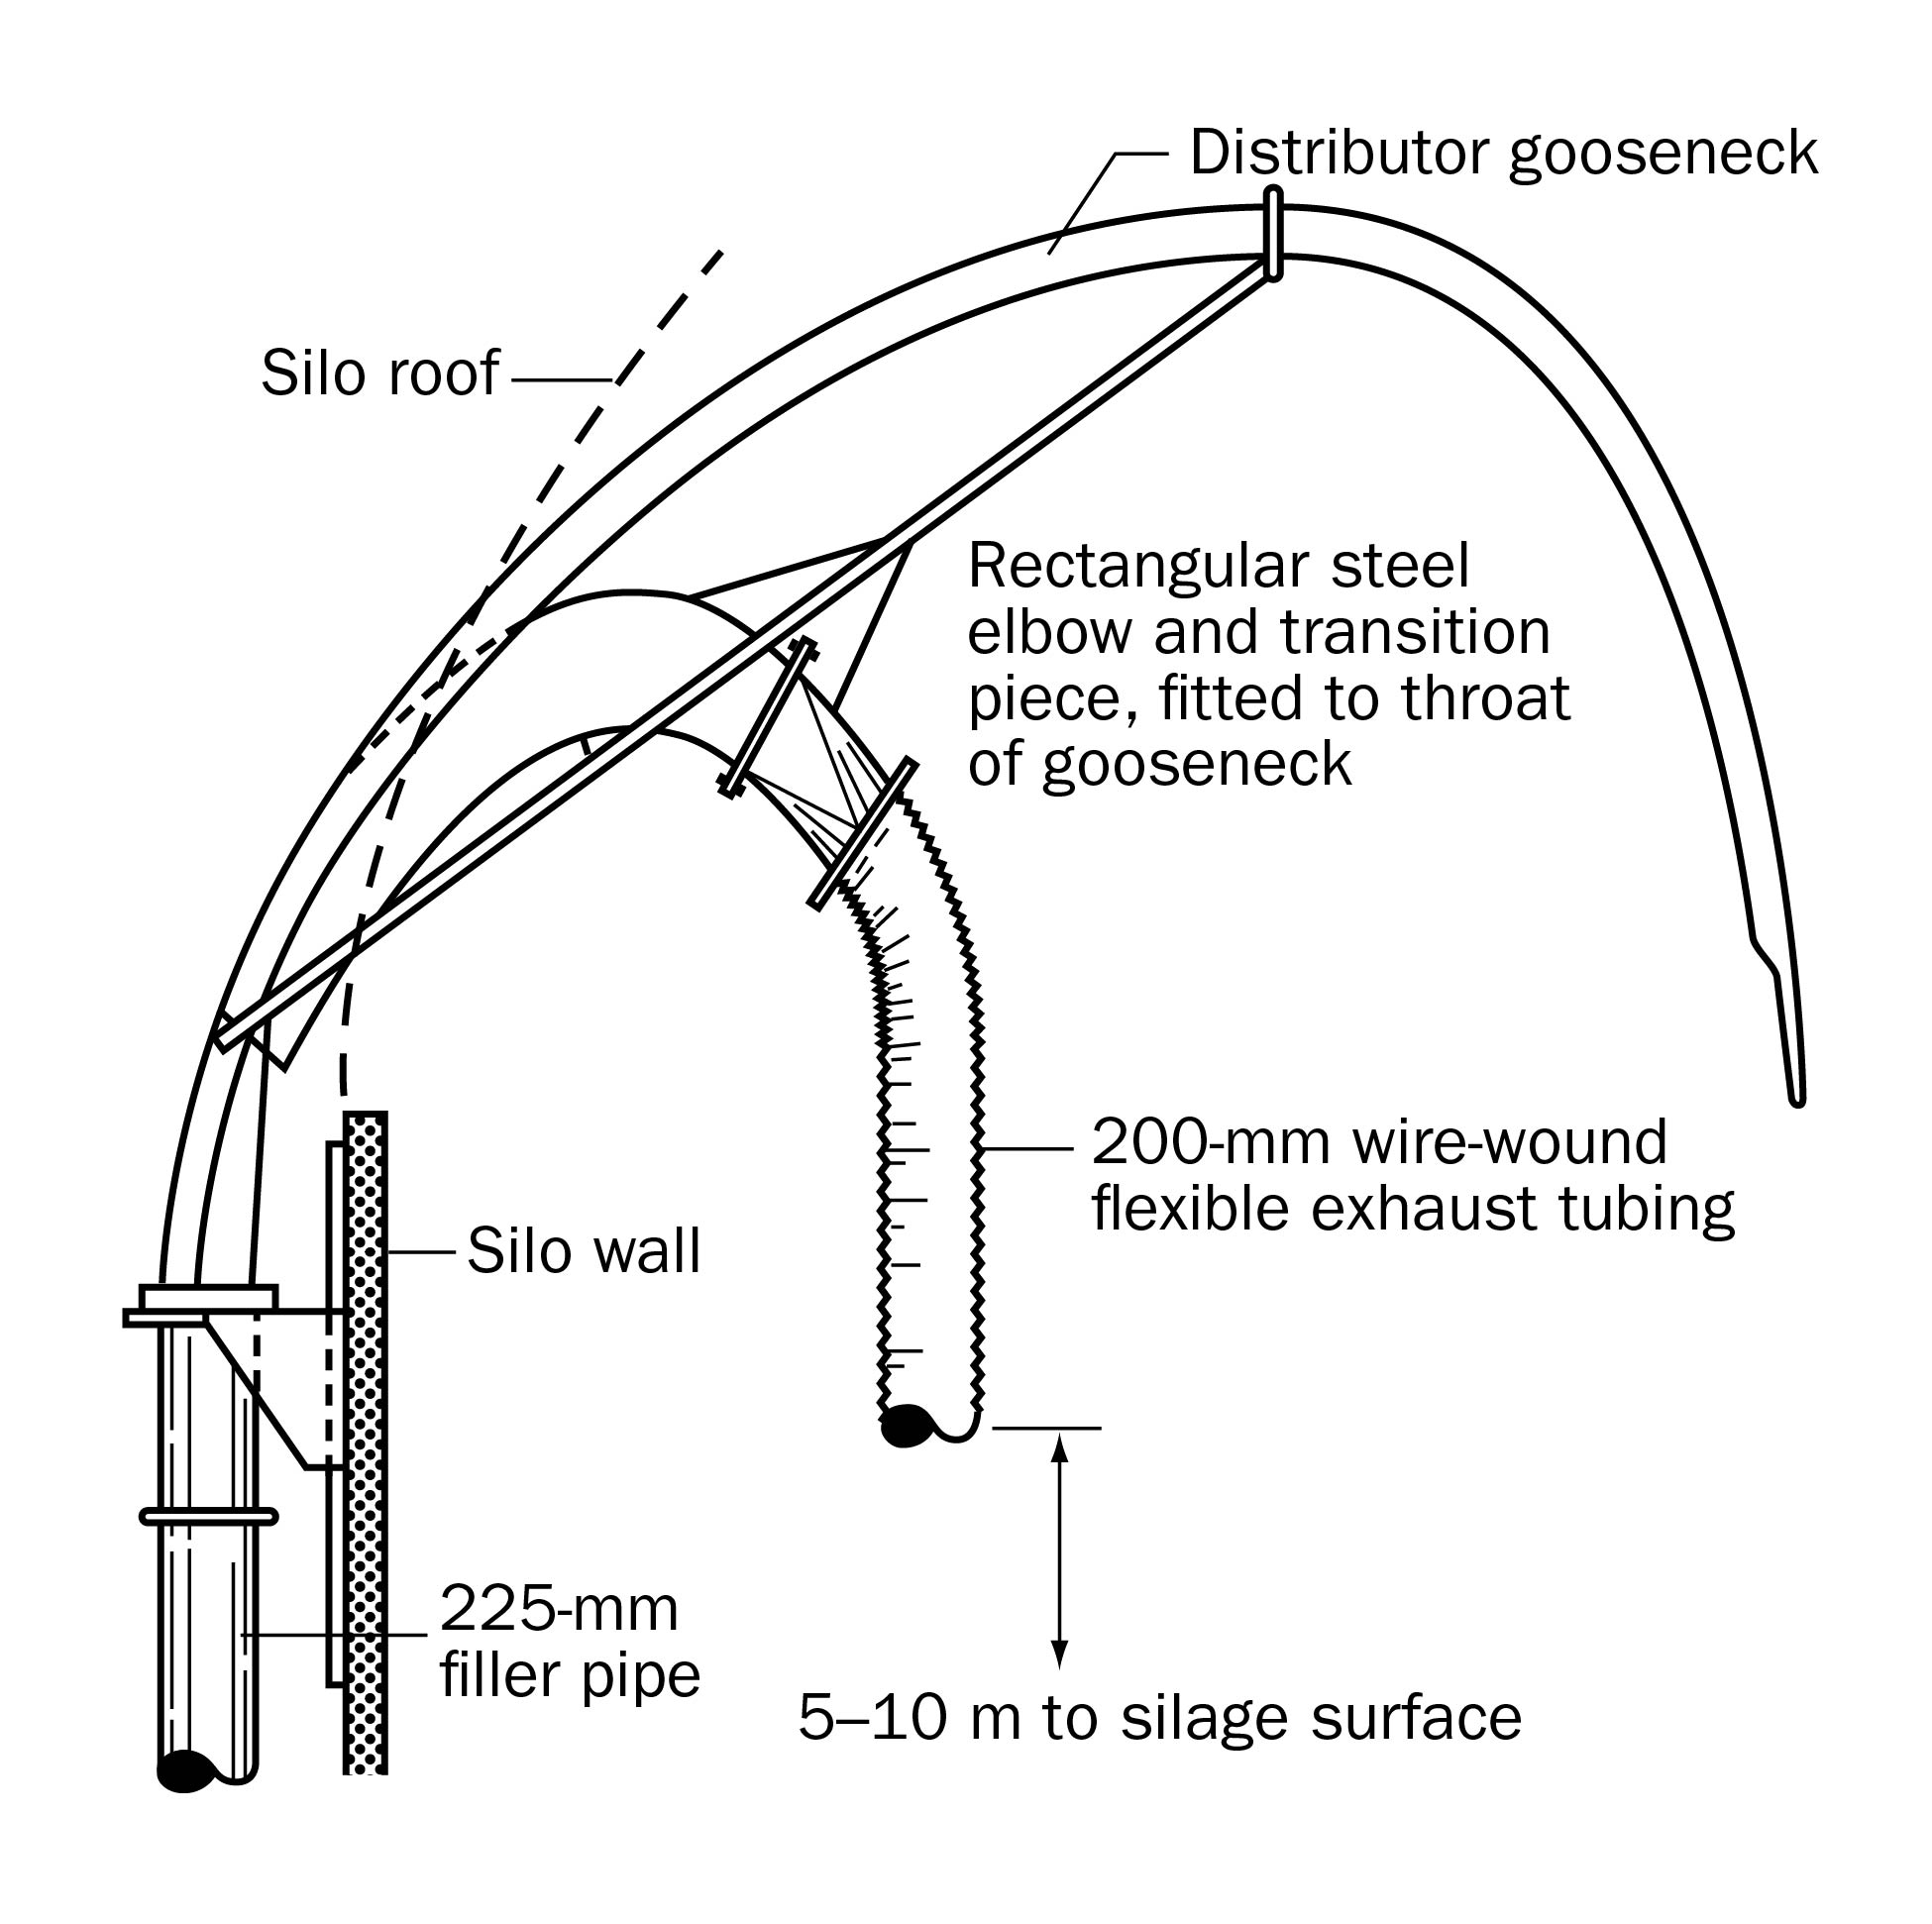 a suggested ventilation adapter for silos equipped with rotary distributors